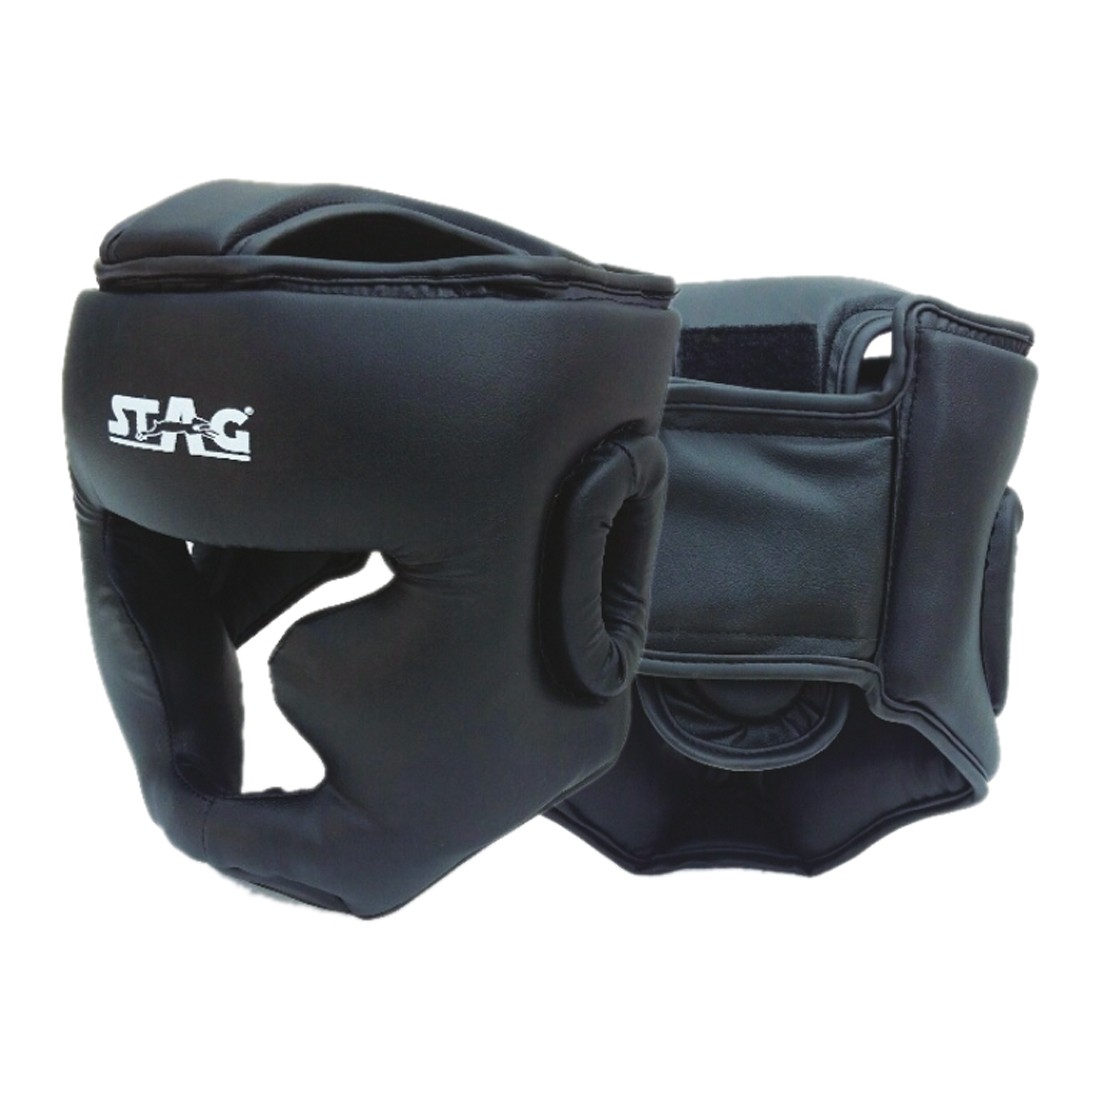 STAG BOXING HEAD GUARD PU CHICK CHIN COVER PADDED TOP COVER PROTECTED